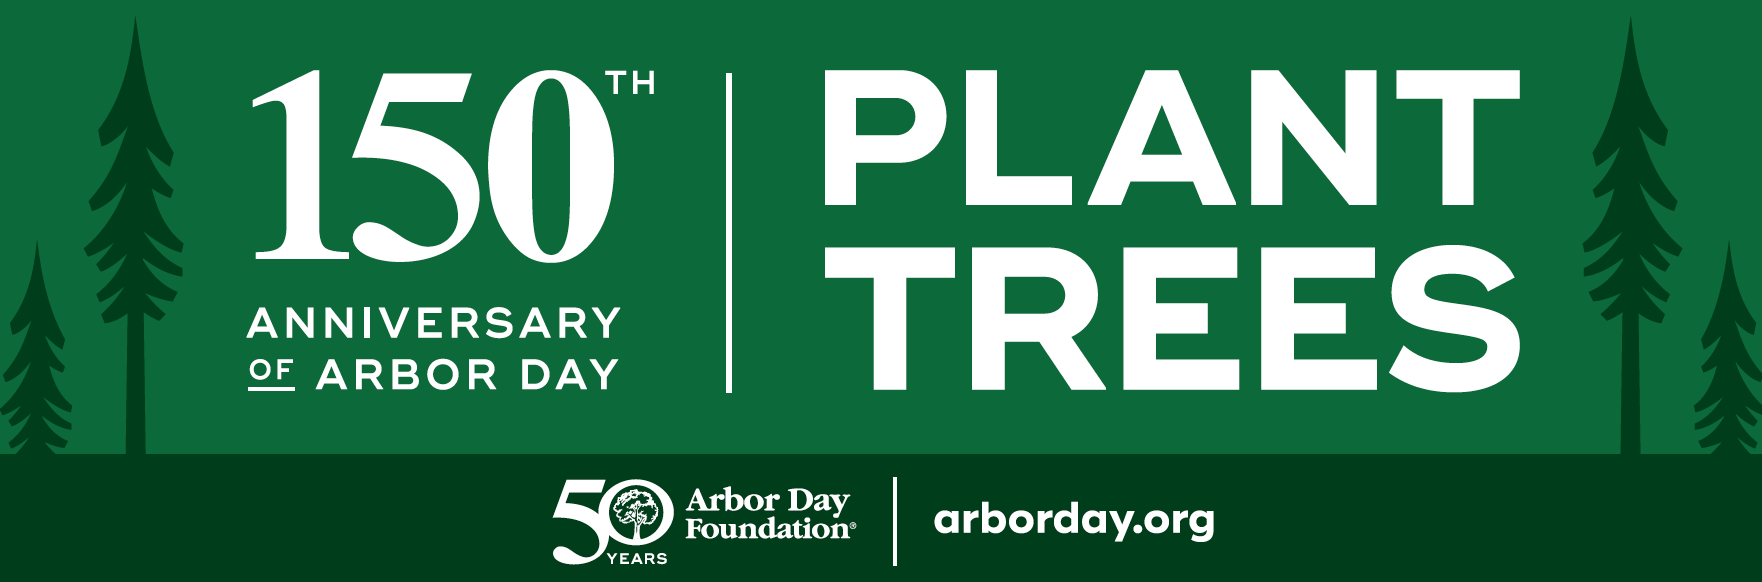 green background with white text for 150th plant trees arbor celebration